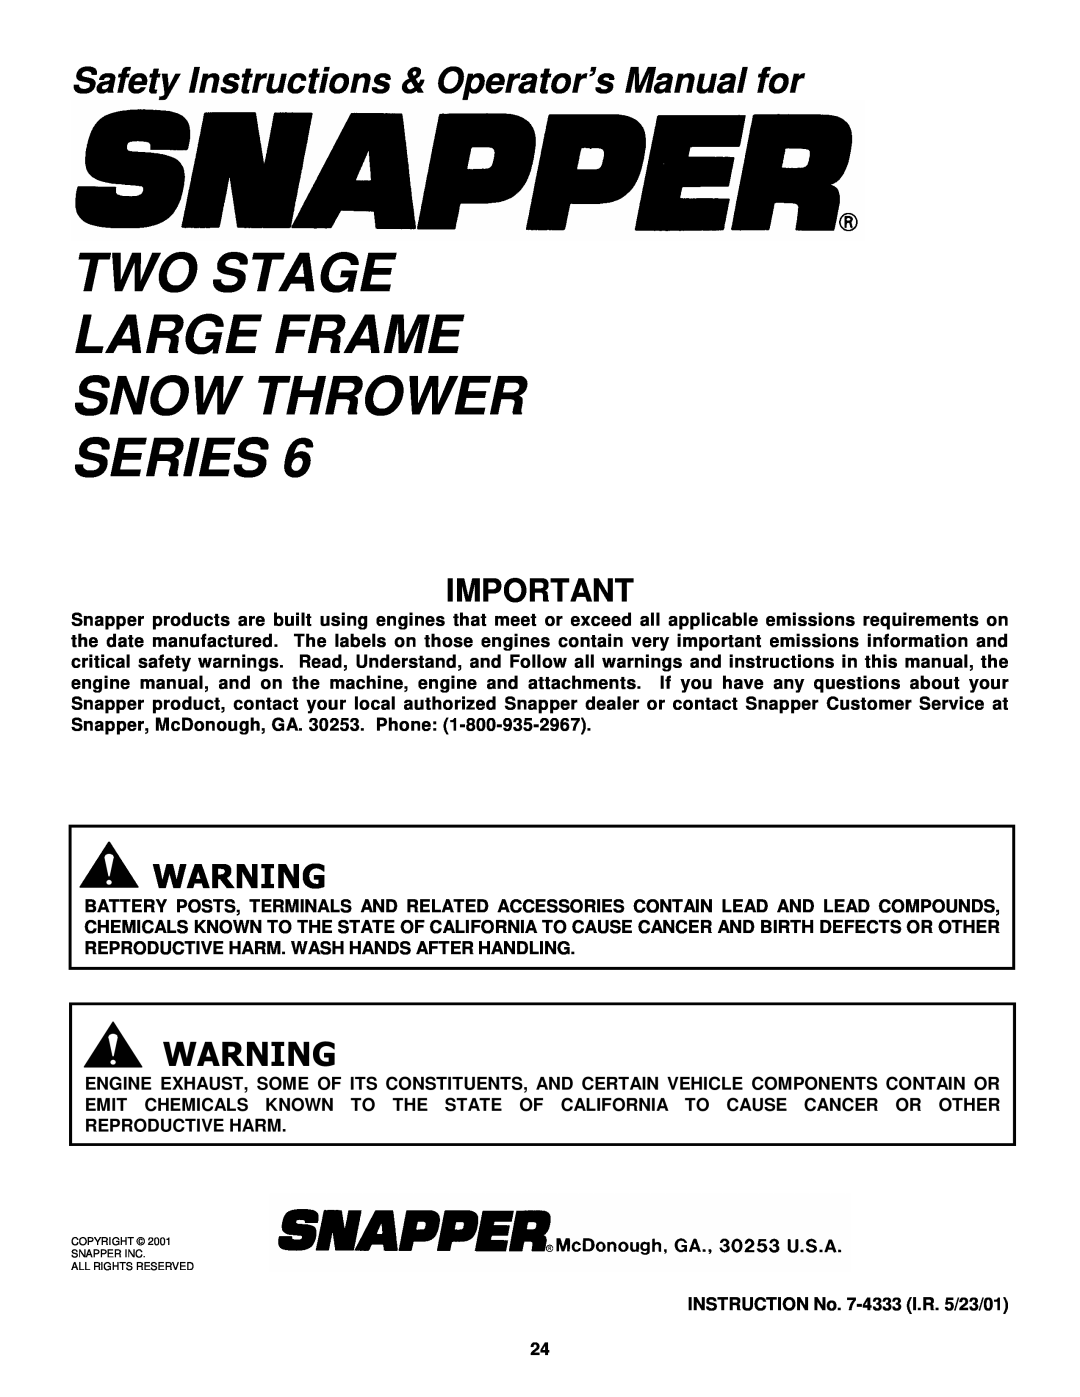 Snapper 8246, 9266E, 11306, 9266 Two Stage Large Frame Snow Thrower Series, Safety Instructions & Operator’s Manual for 